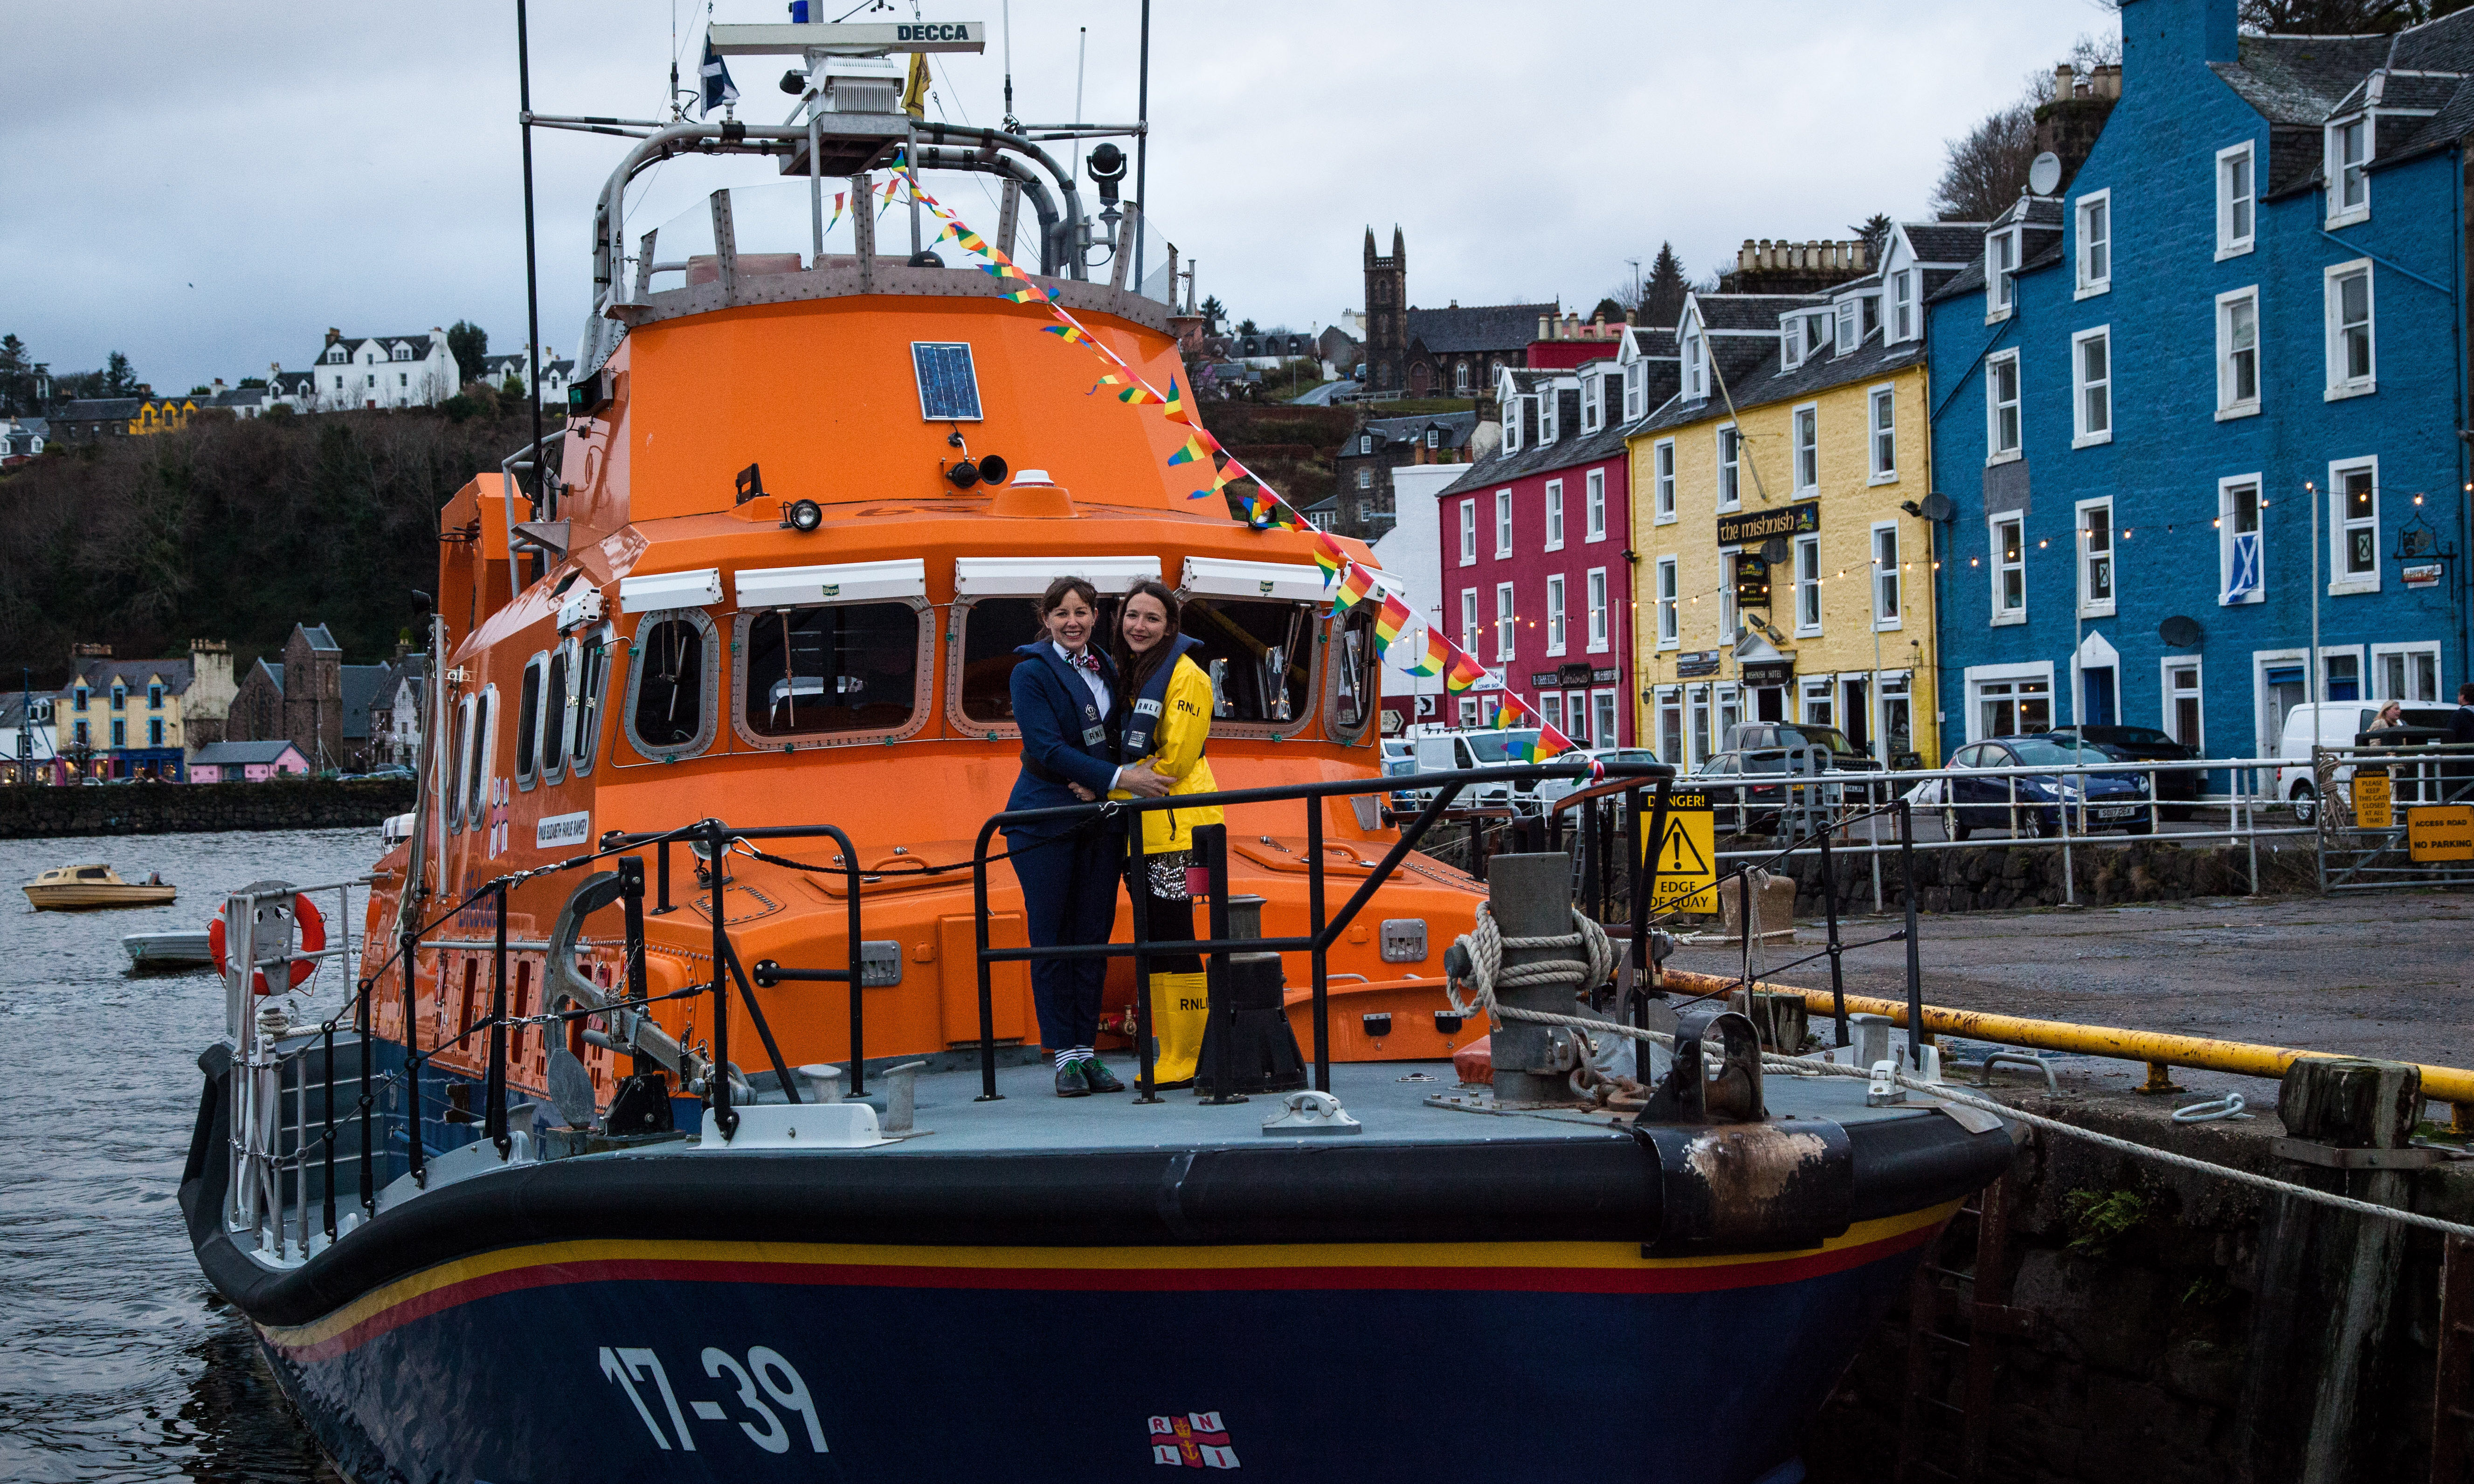 Volunteer crew member, Rose Skelton and her wife Nomi Stone had their marriage blessed on Tobermory’s Severn class lifeboat on Saturday in what is believed to be the first blessing of a same sex couple to take place on an RNLI lifeboat.